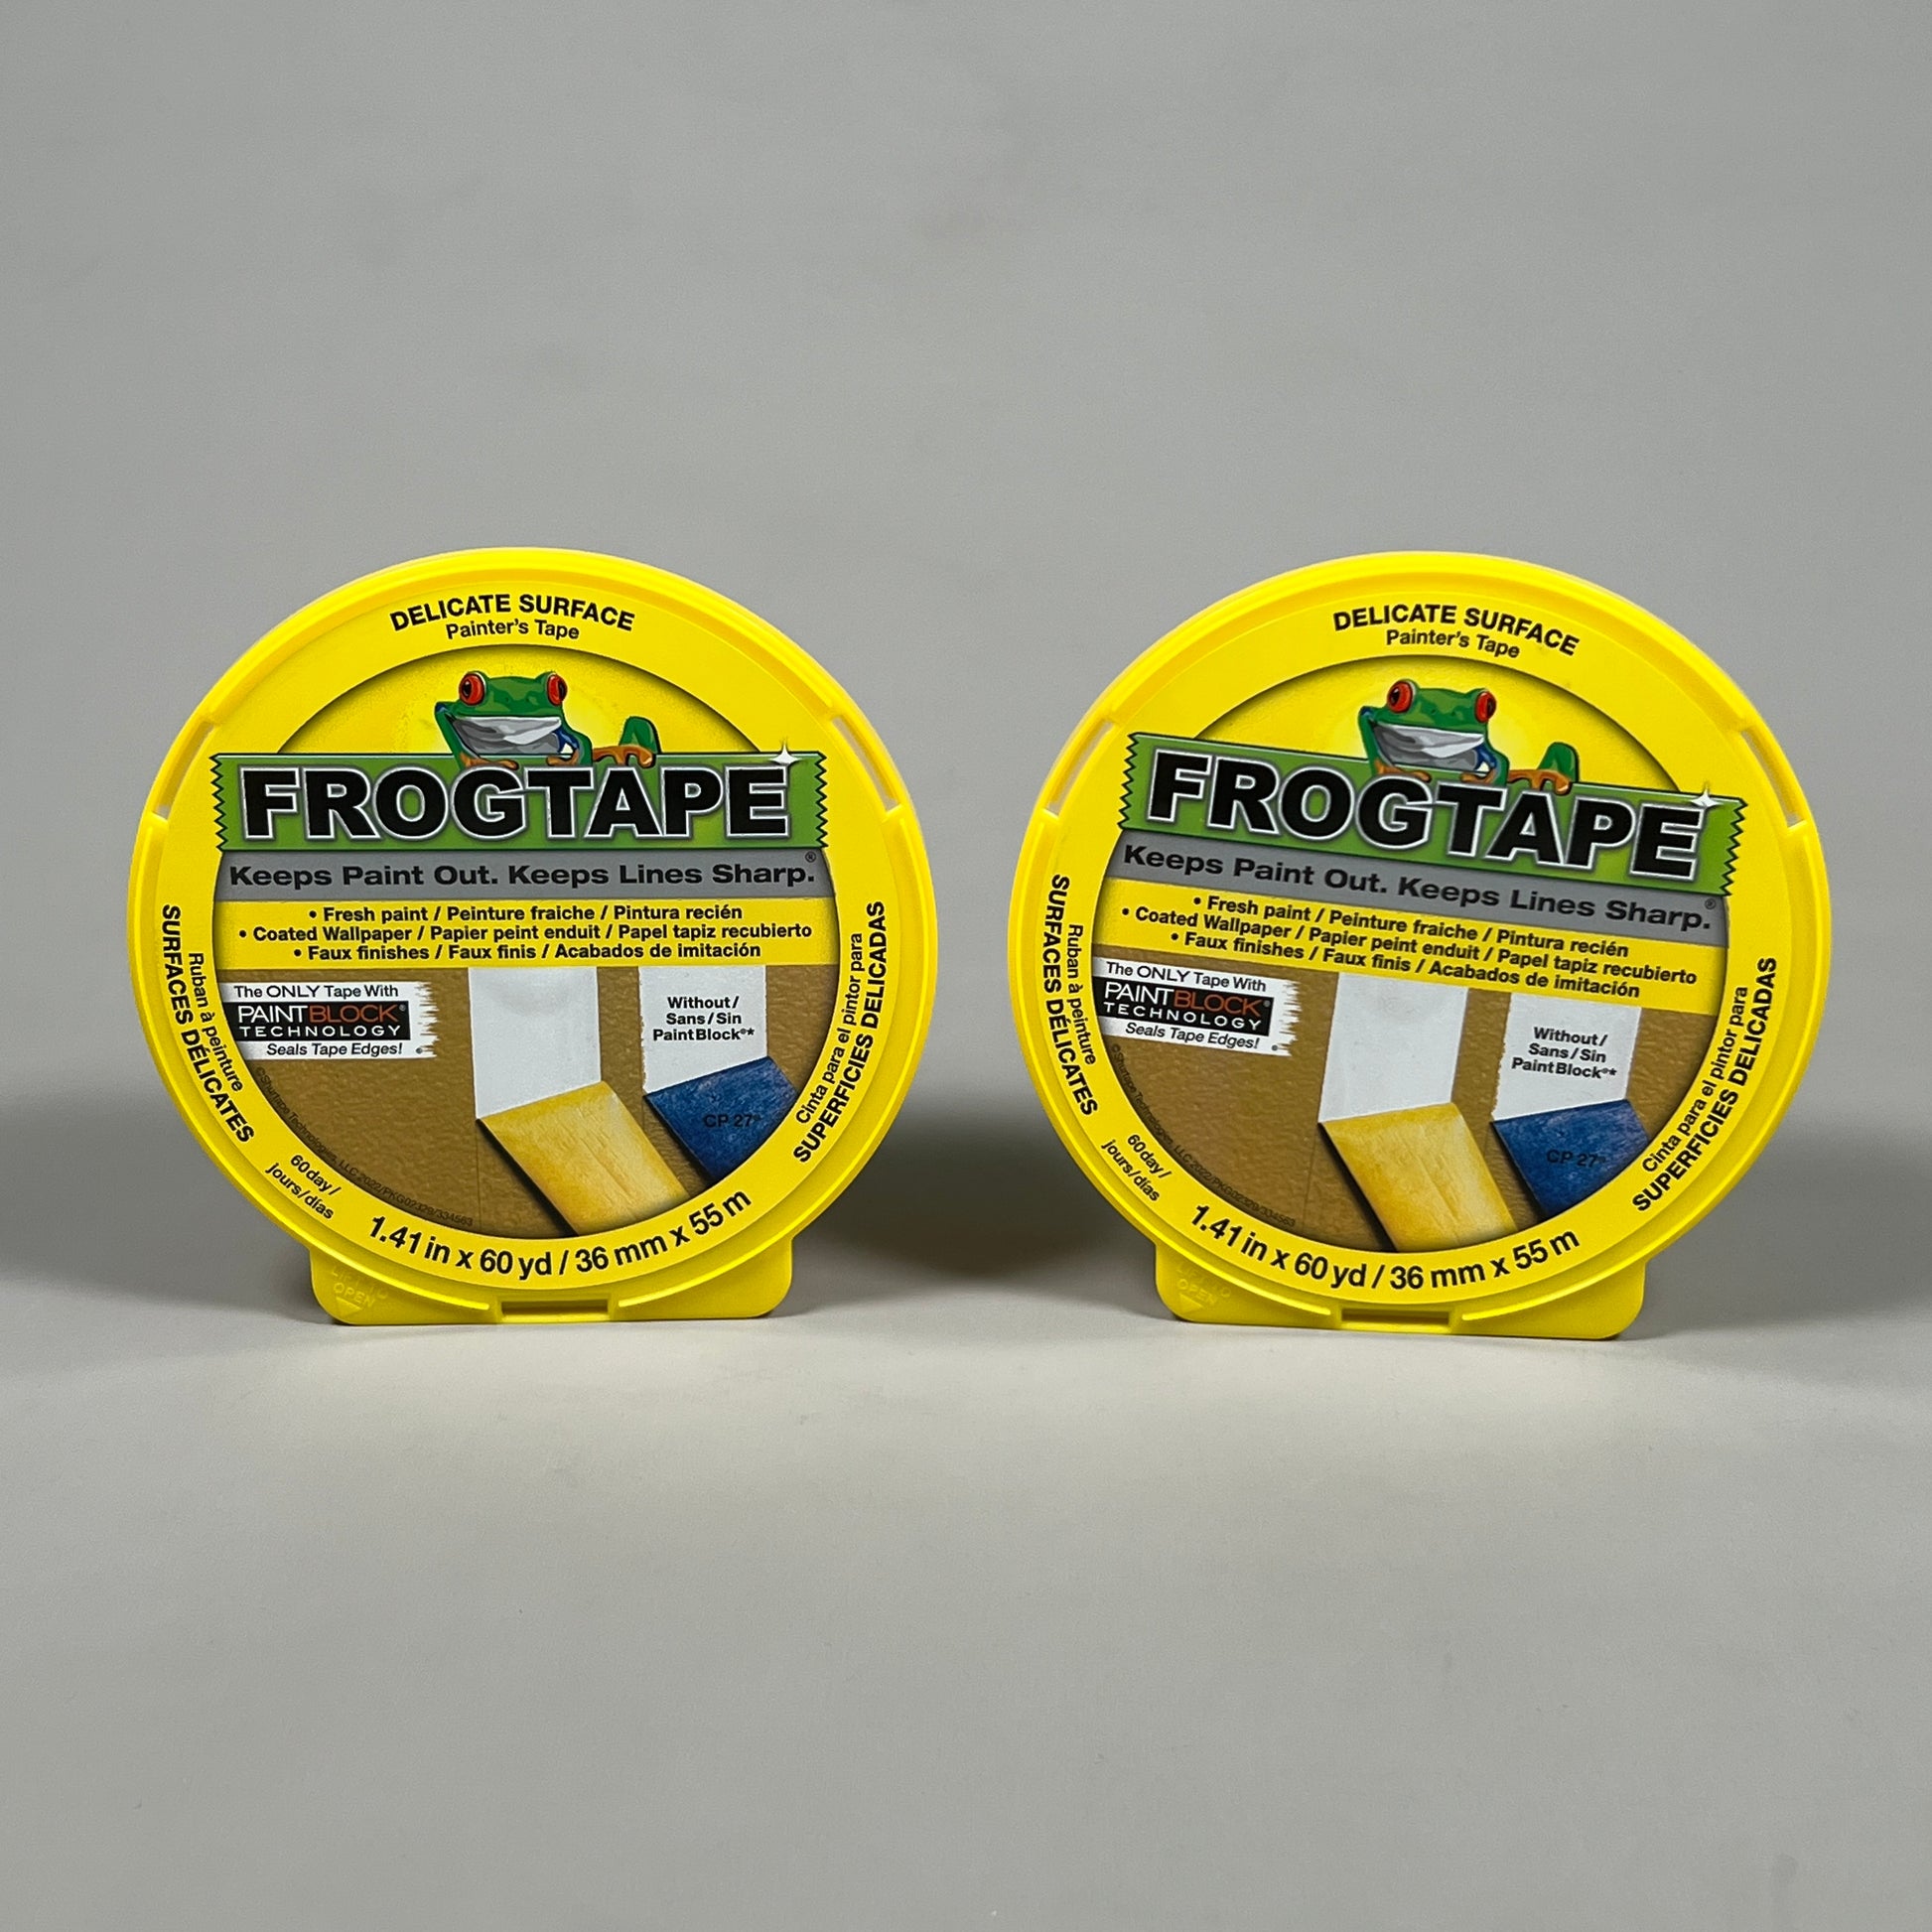 FrogTape Delicate Surface Painting Tape, Yellow, 1.41 in. x 60 yd.